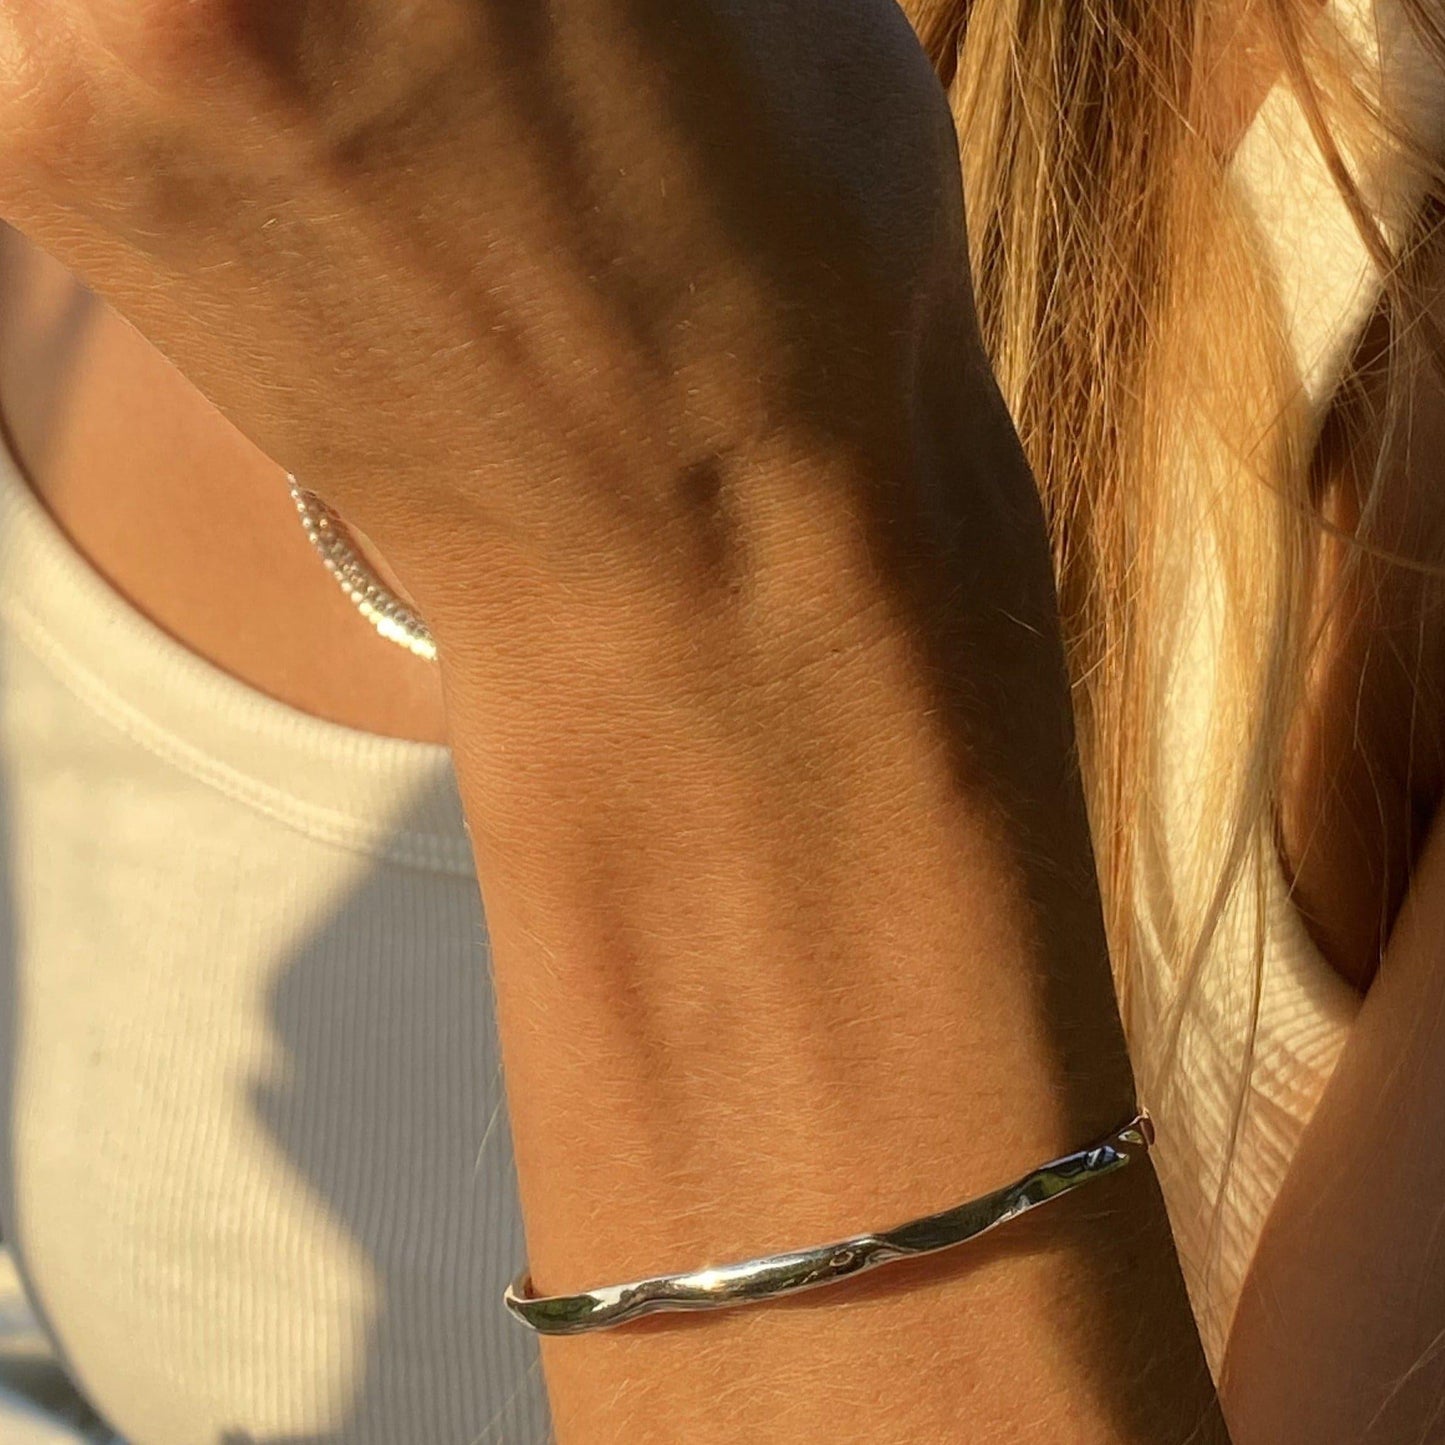 THE COCO BRACELET - sterling silver